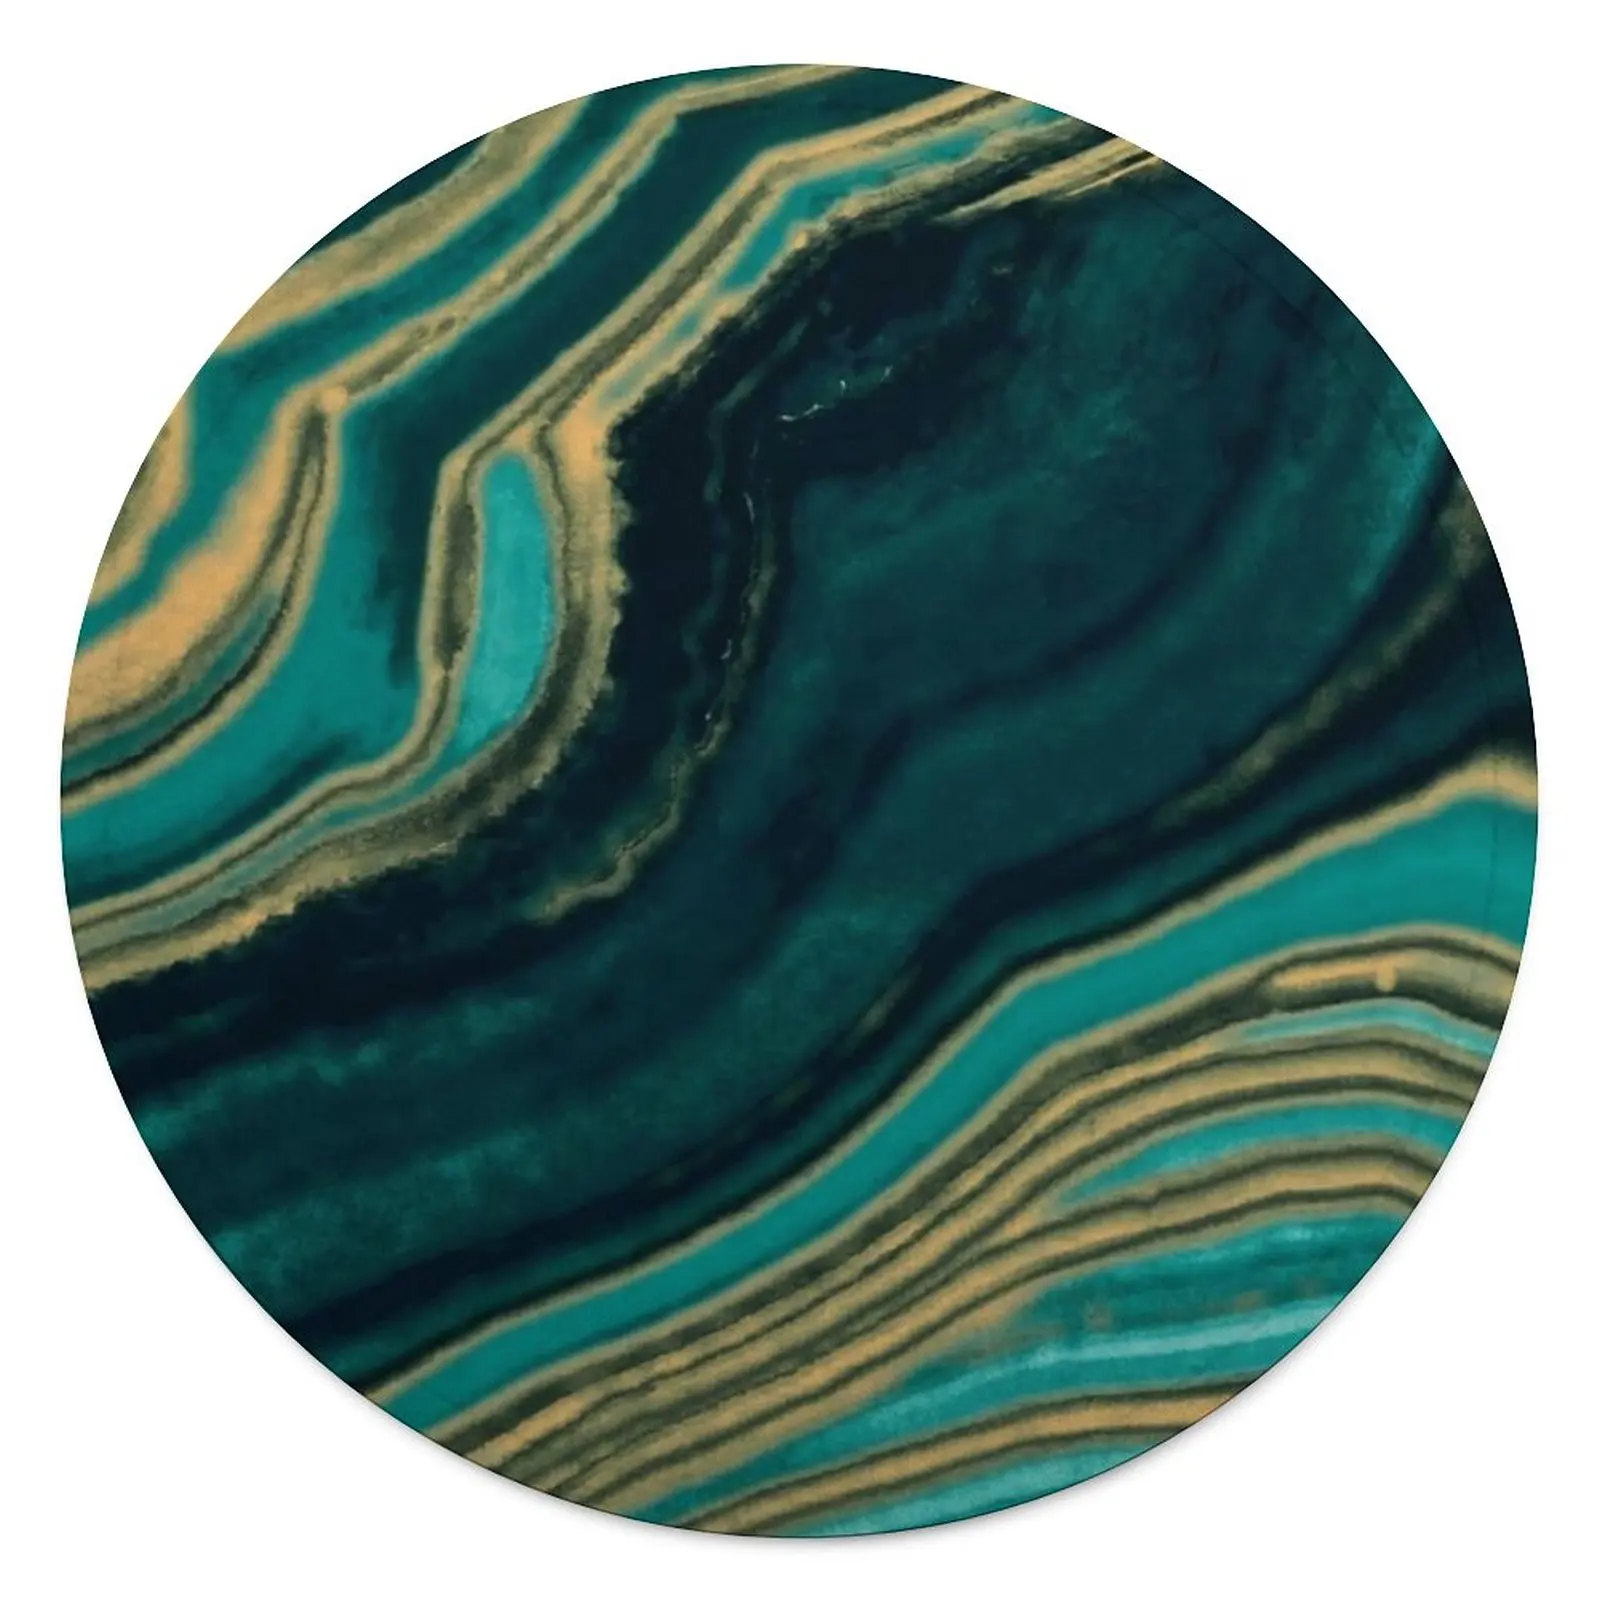 

Marble Art Blanket Aqua And Metallic Gold Marble Texture Soft Cheap Round Bedspread Funny Fleece Couch Blanket